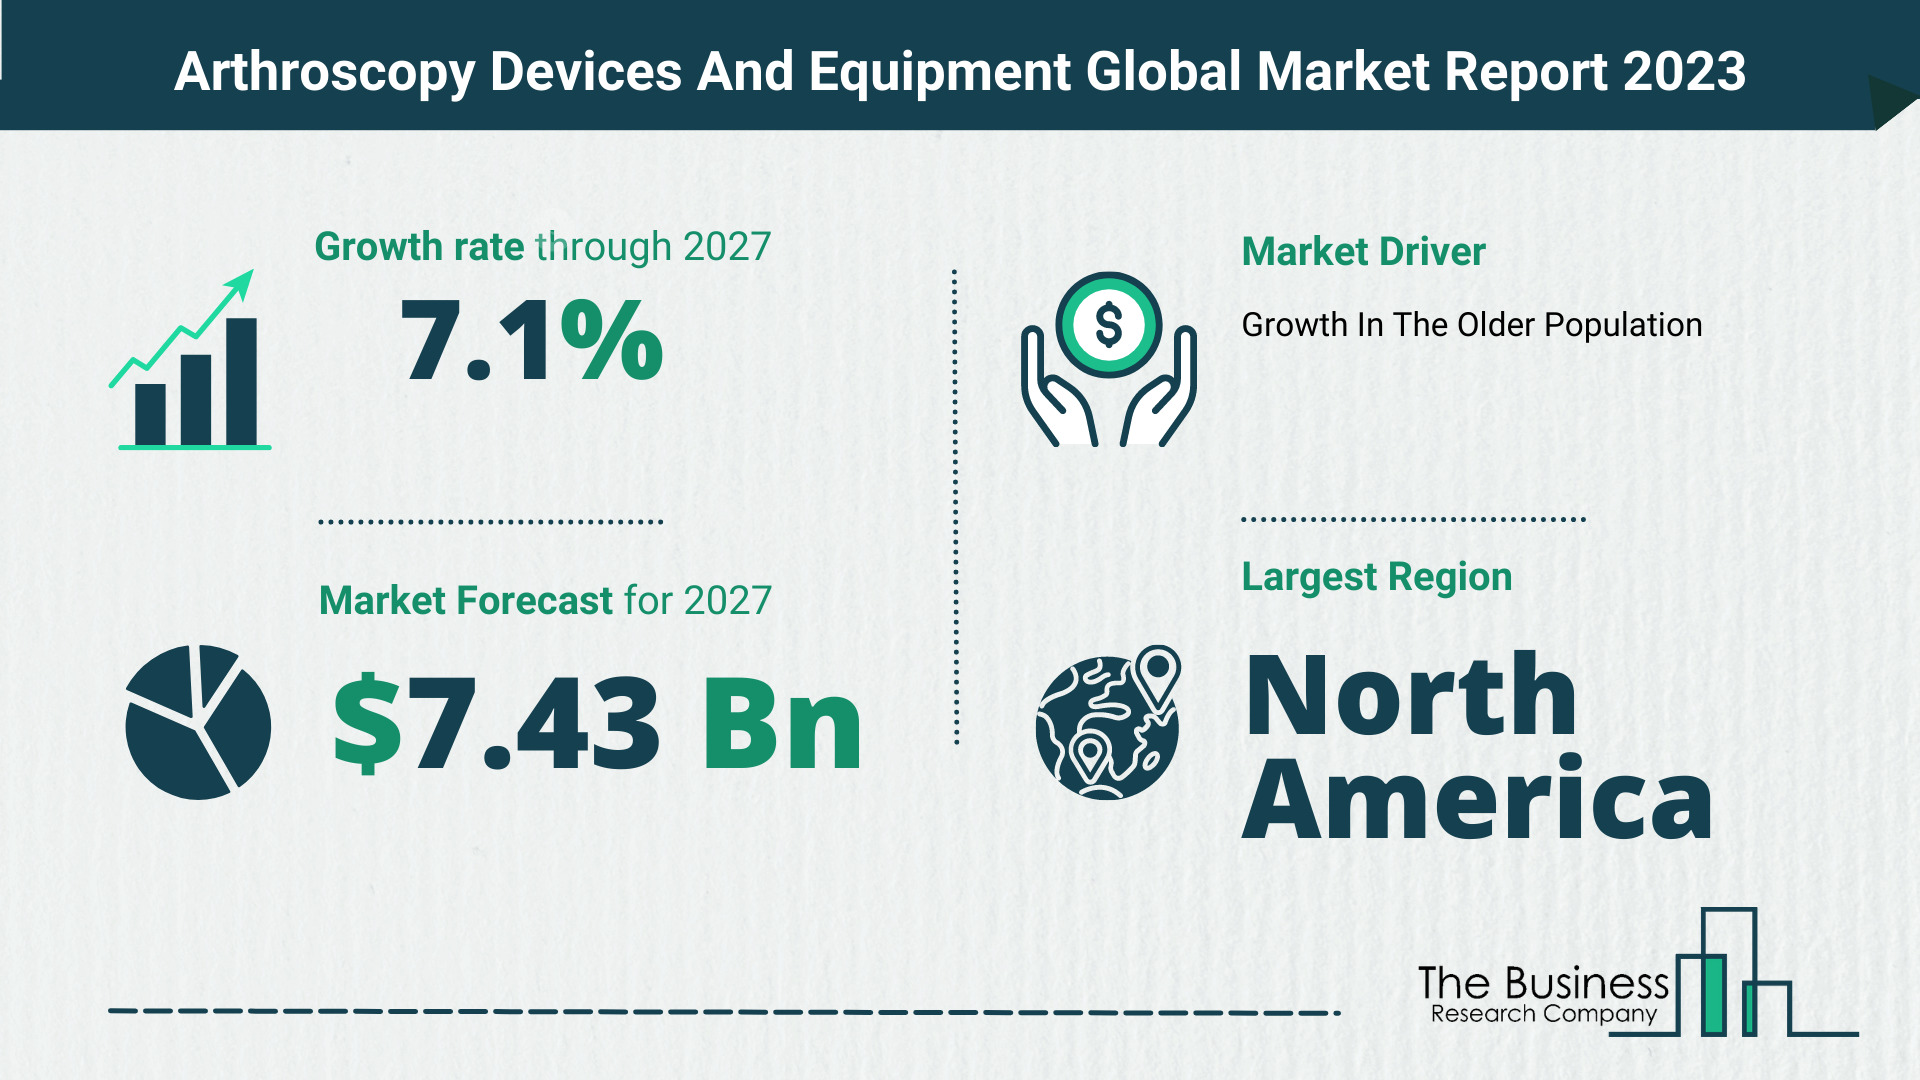 Arthroscopy Devices And Equipment Market Overview: Market Size, Drivers And Trends